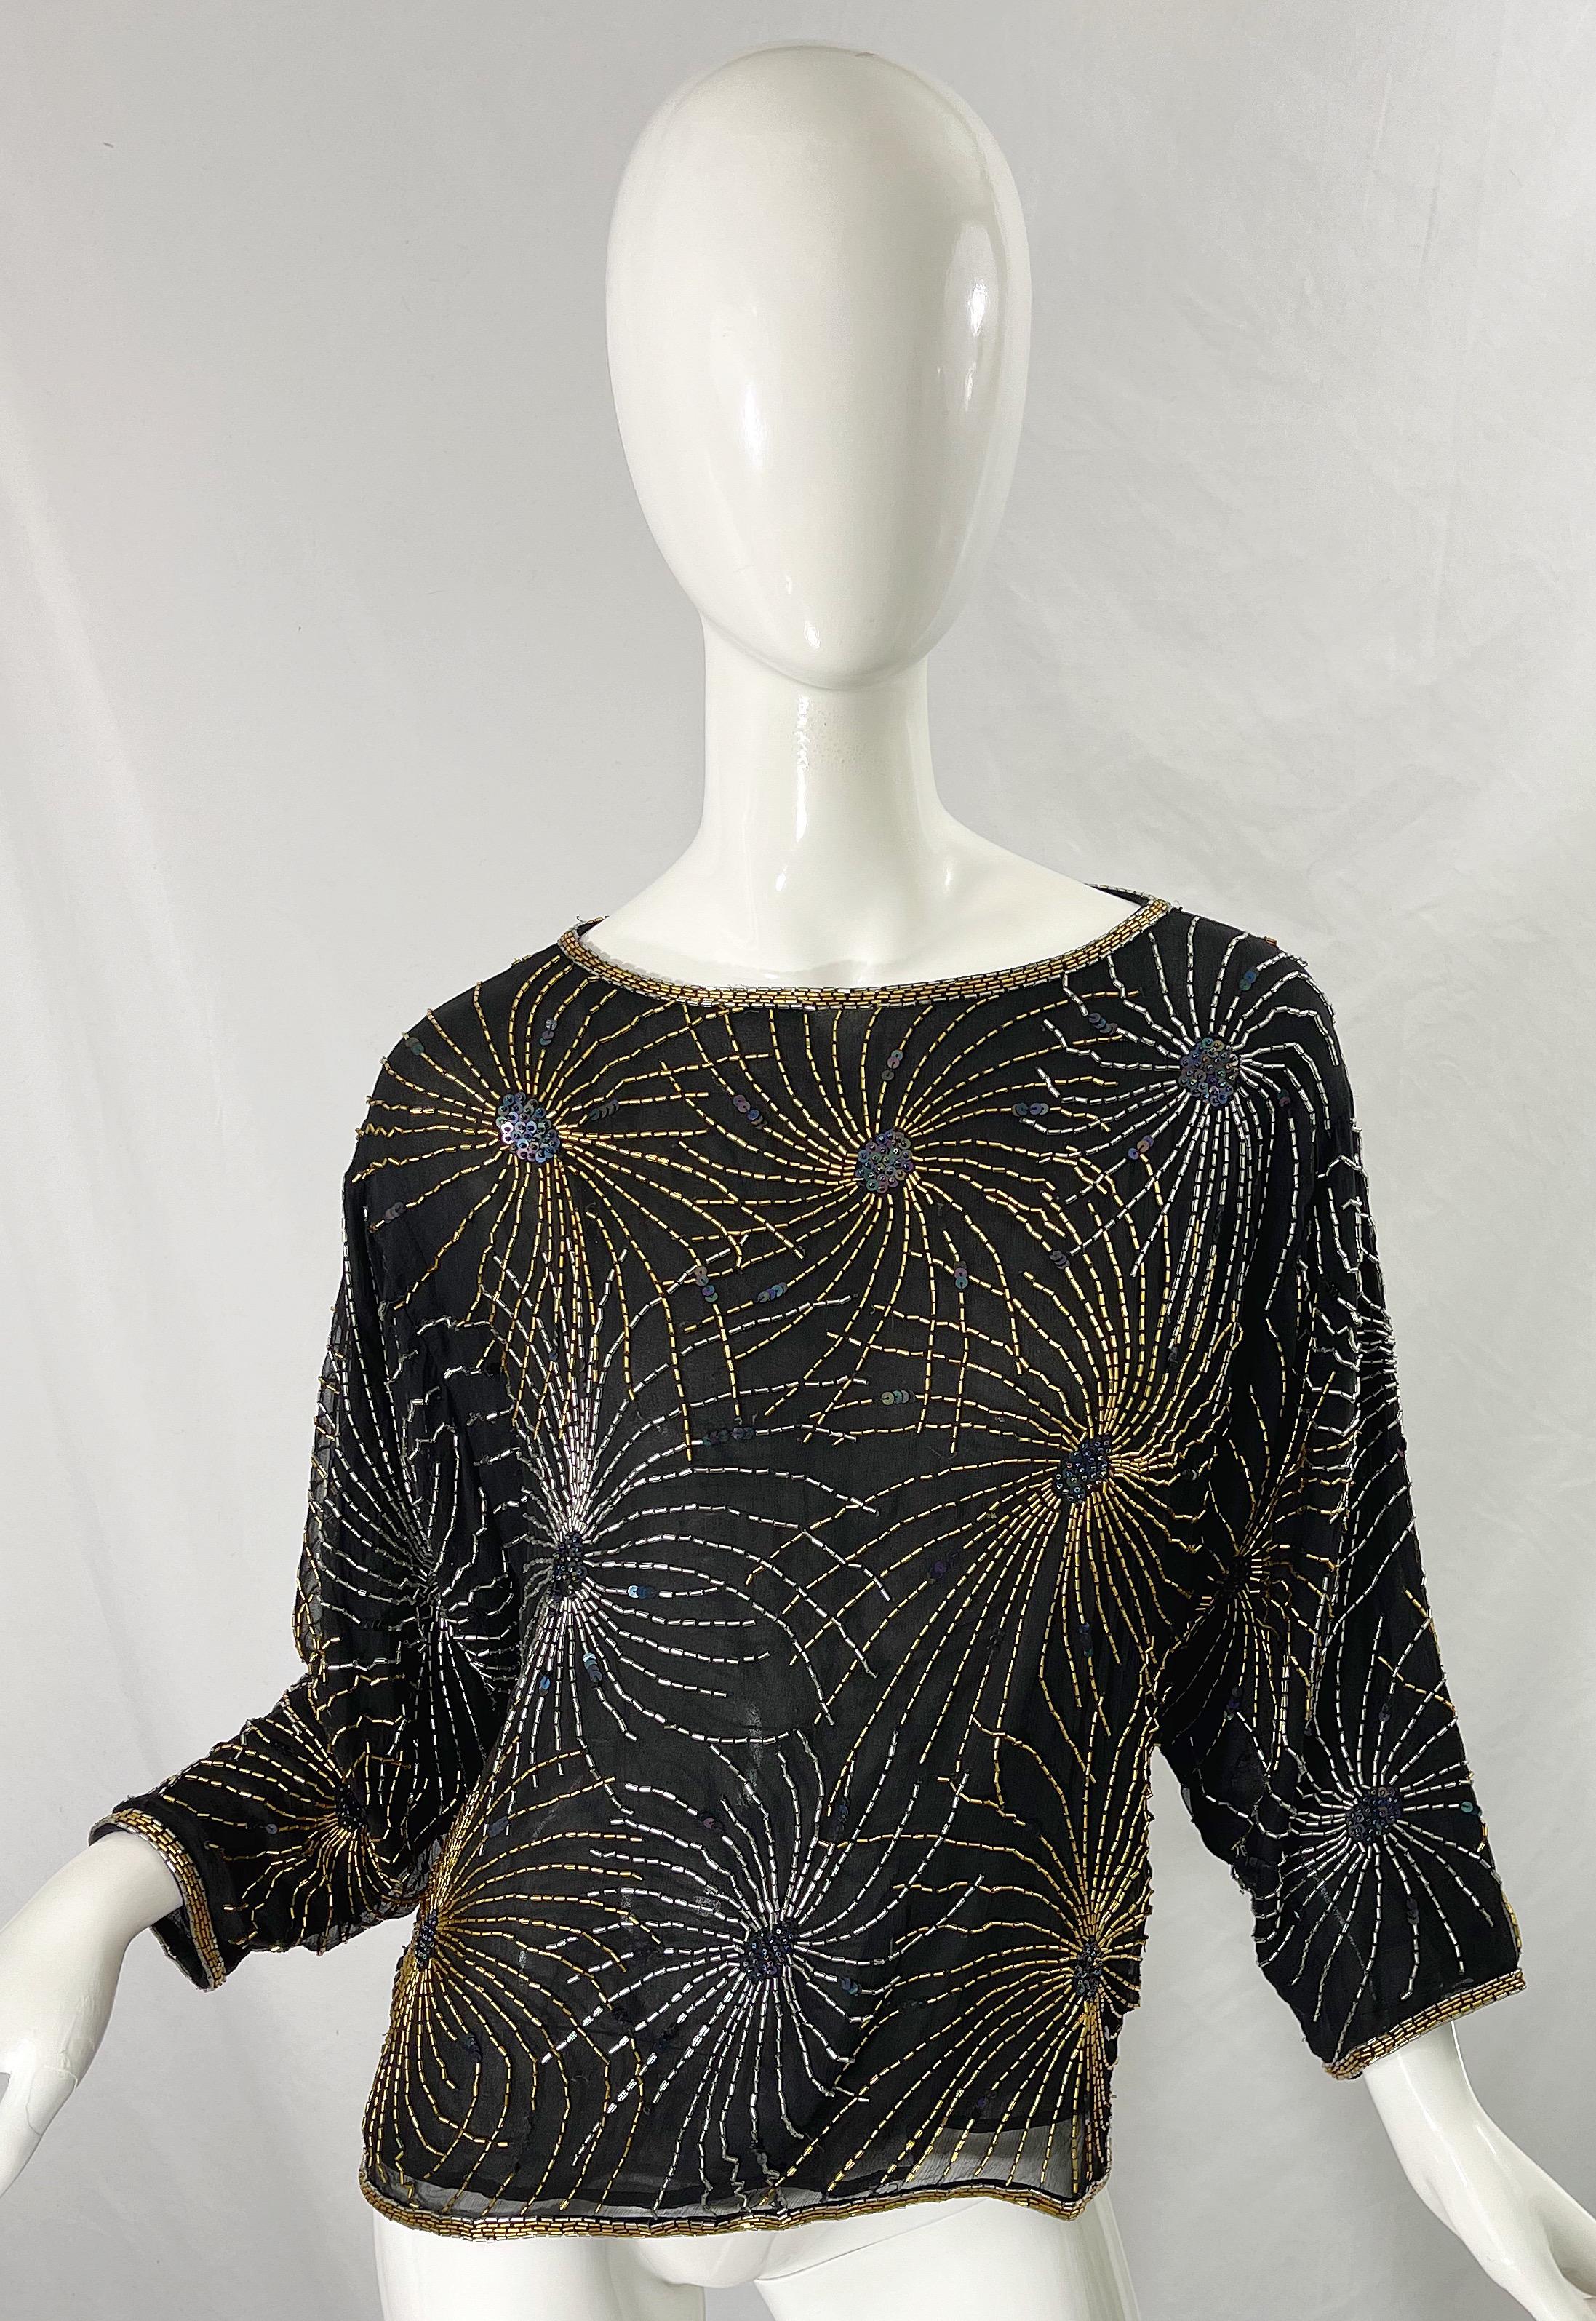 Beautiful iconic late 70s HALSTON black silk chiffon fireworks disco top shirt ! Features thousands of hand-sedan silver and gold sequins with iridescent sequins scattered throughout. Slight dolman sleeves make this accessible to an array of bust